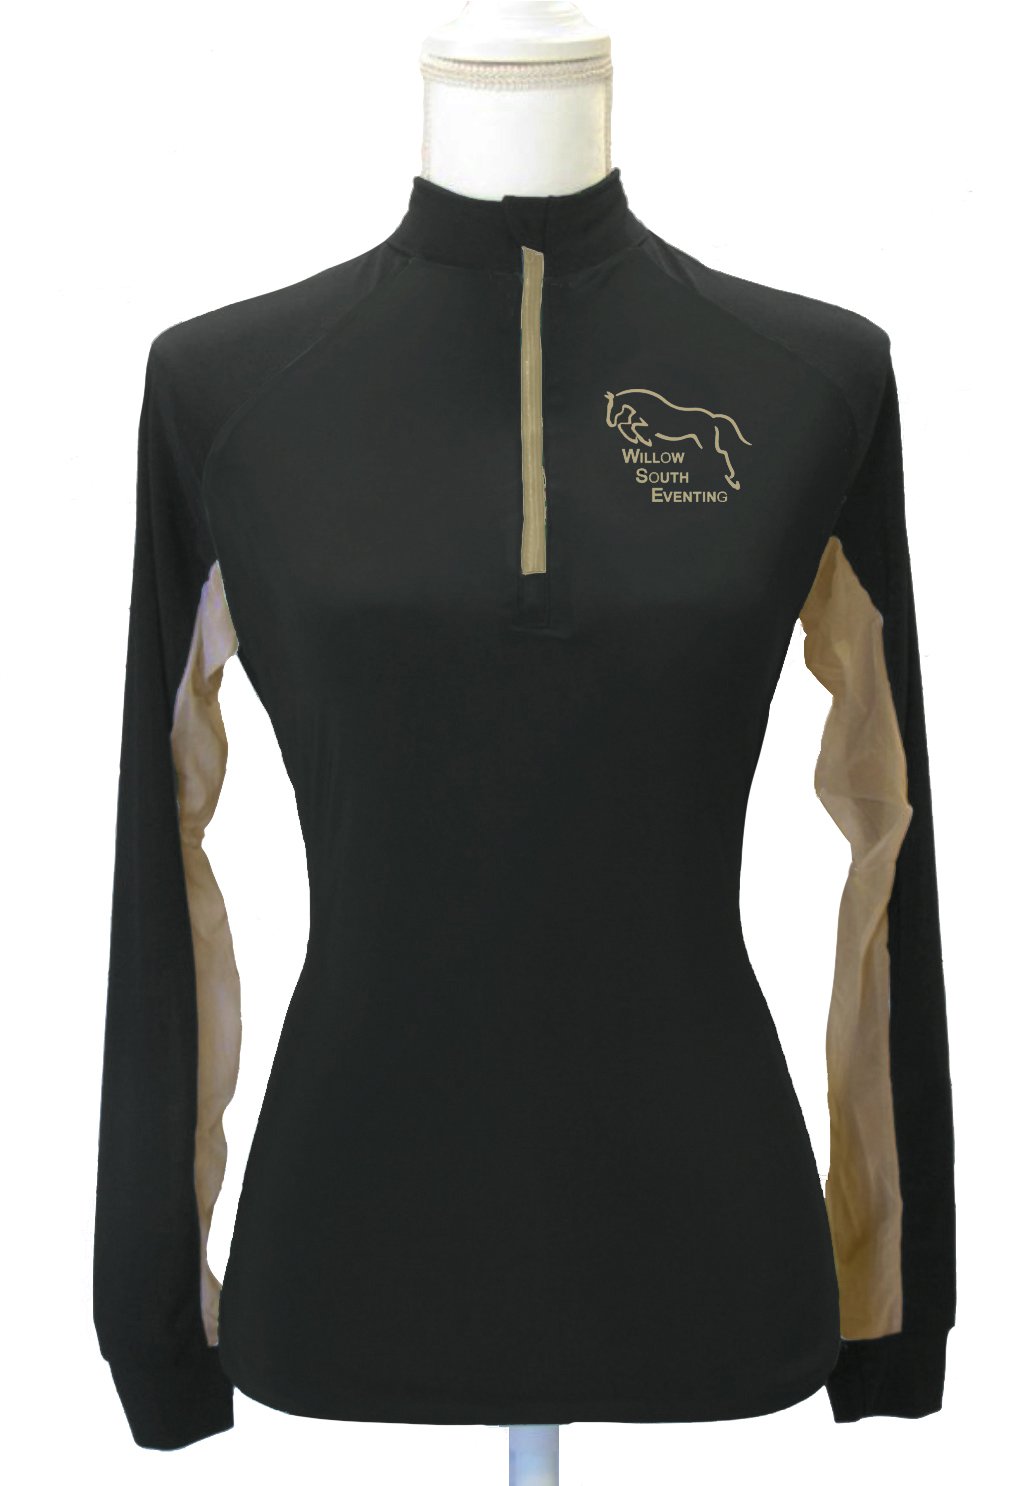 Willow South Eventing Custom Sun Shirt - Black with Tan Accents     Adult + Youth Sizes